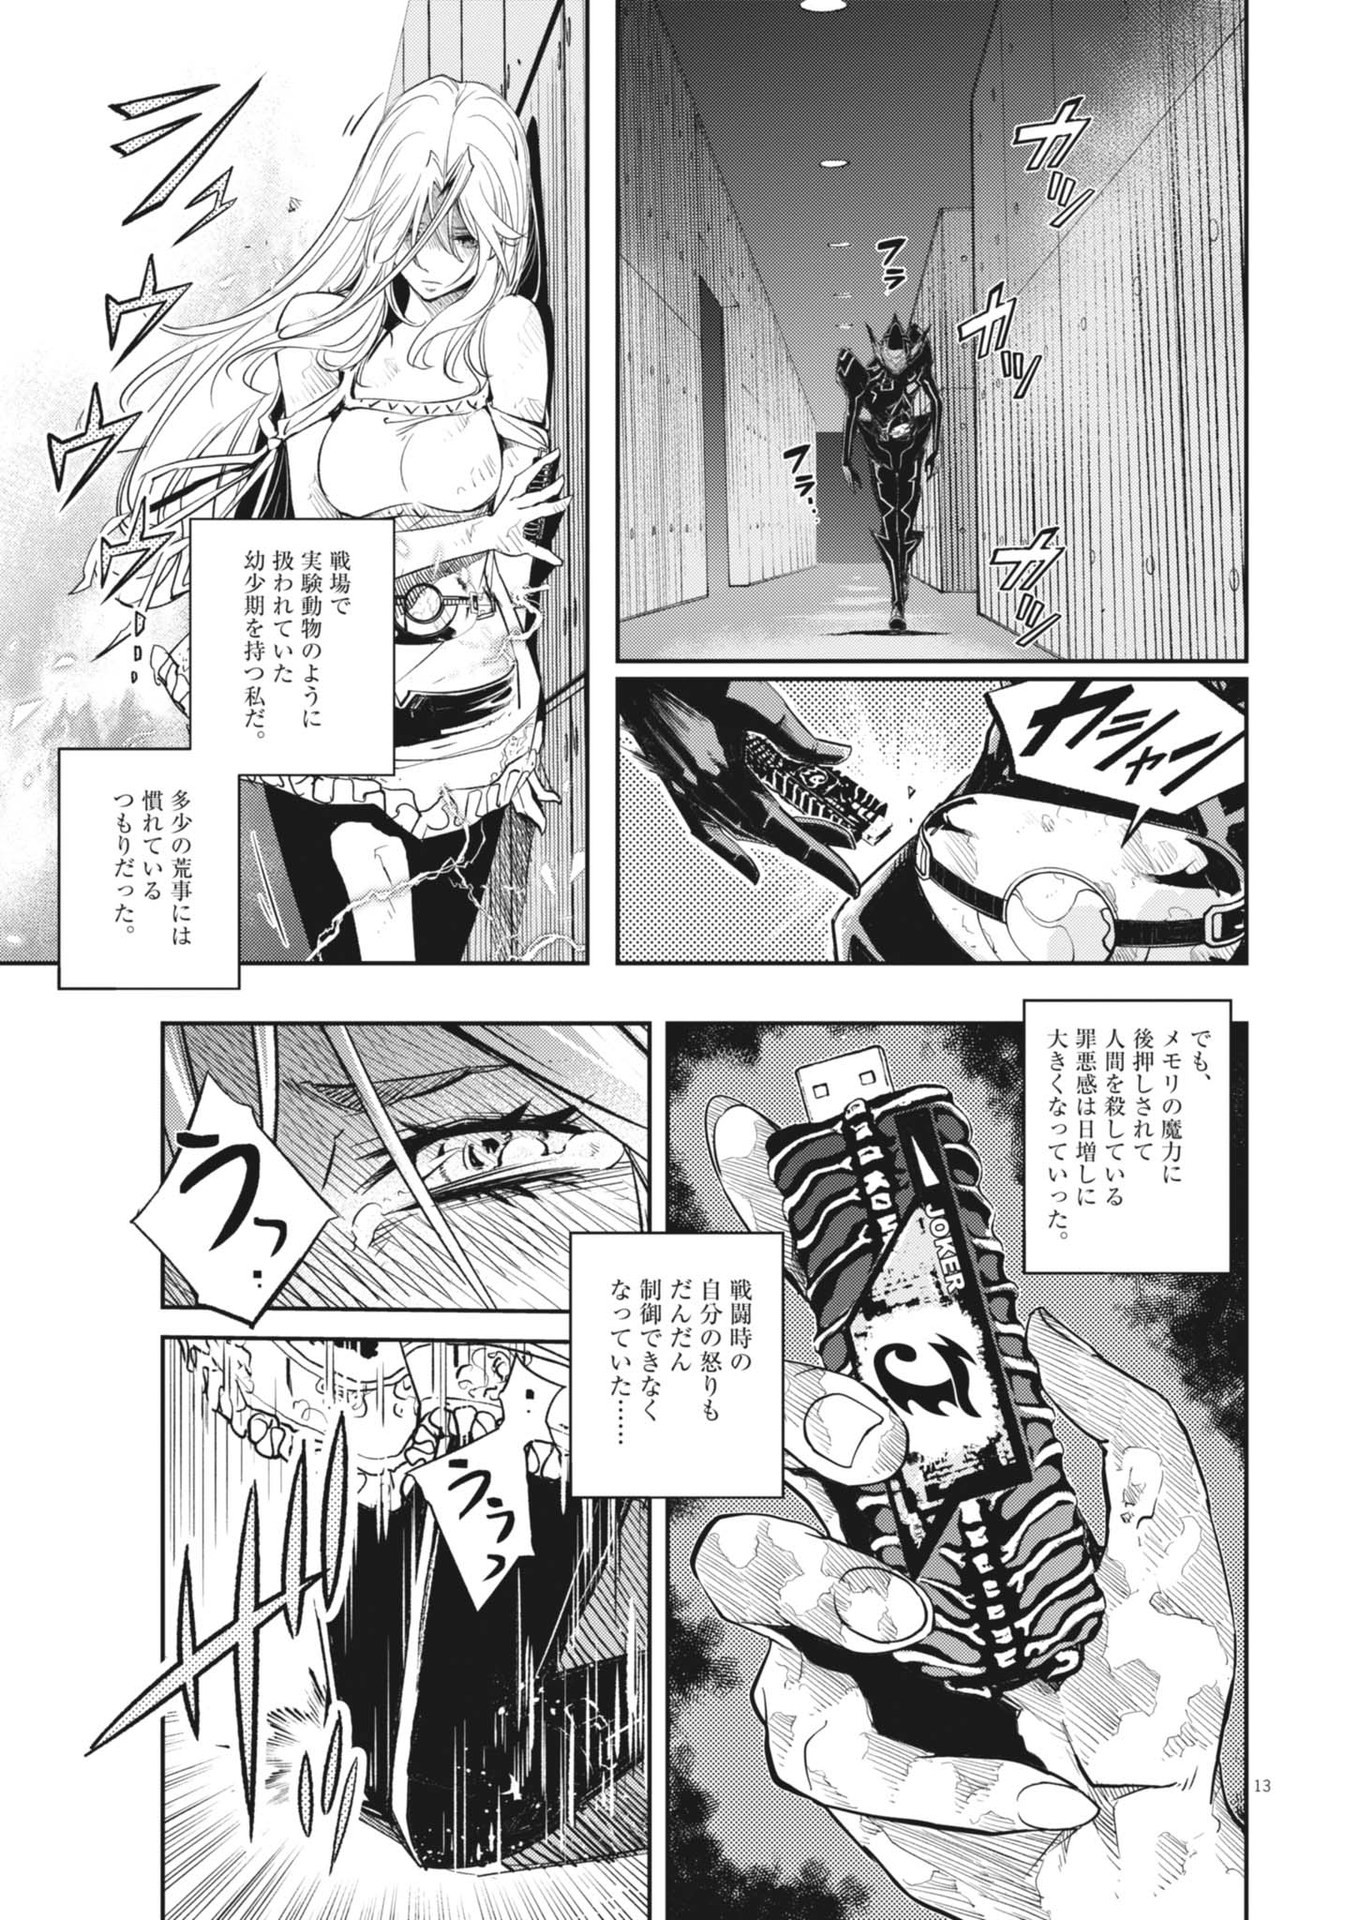 Kamen Rider W: Fuuto Tantei - Chapter 149 - Page 13